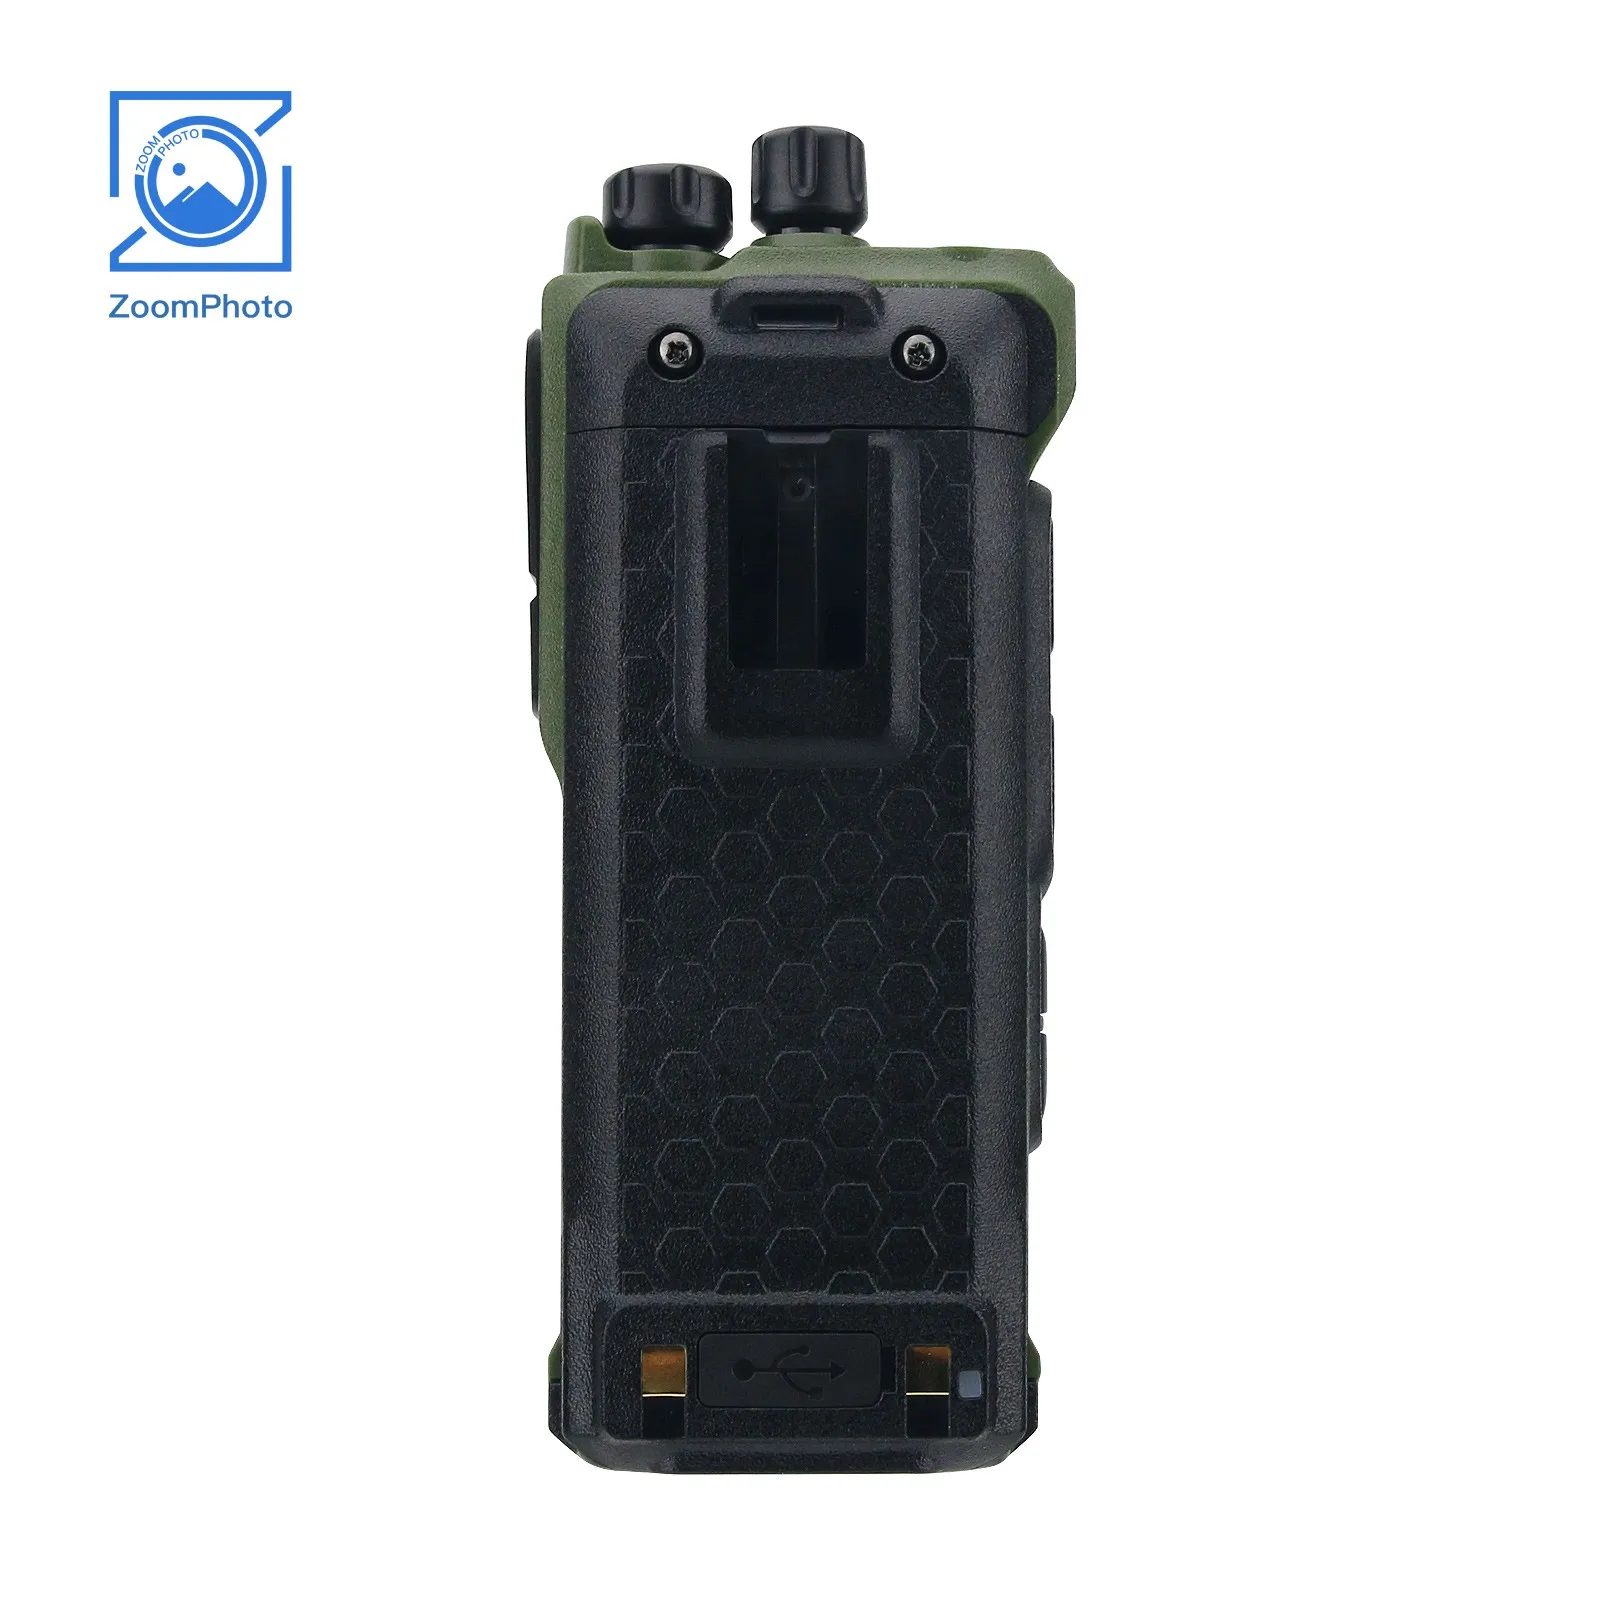 GT-12 10W Multi-band Handheld Walkie Talkie 2-Inch LED Color Screen Built-in Bluetooth Support FM/AM/UHF/VHF